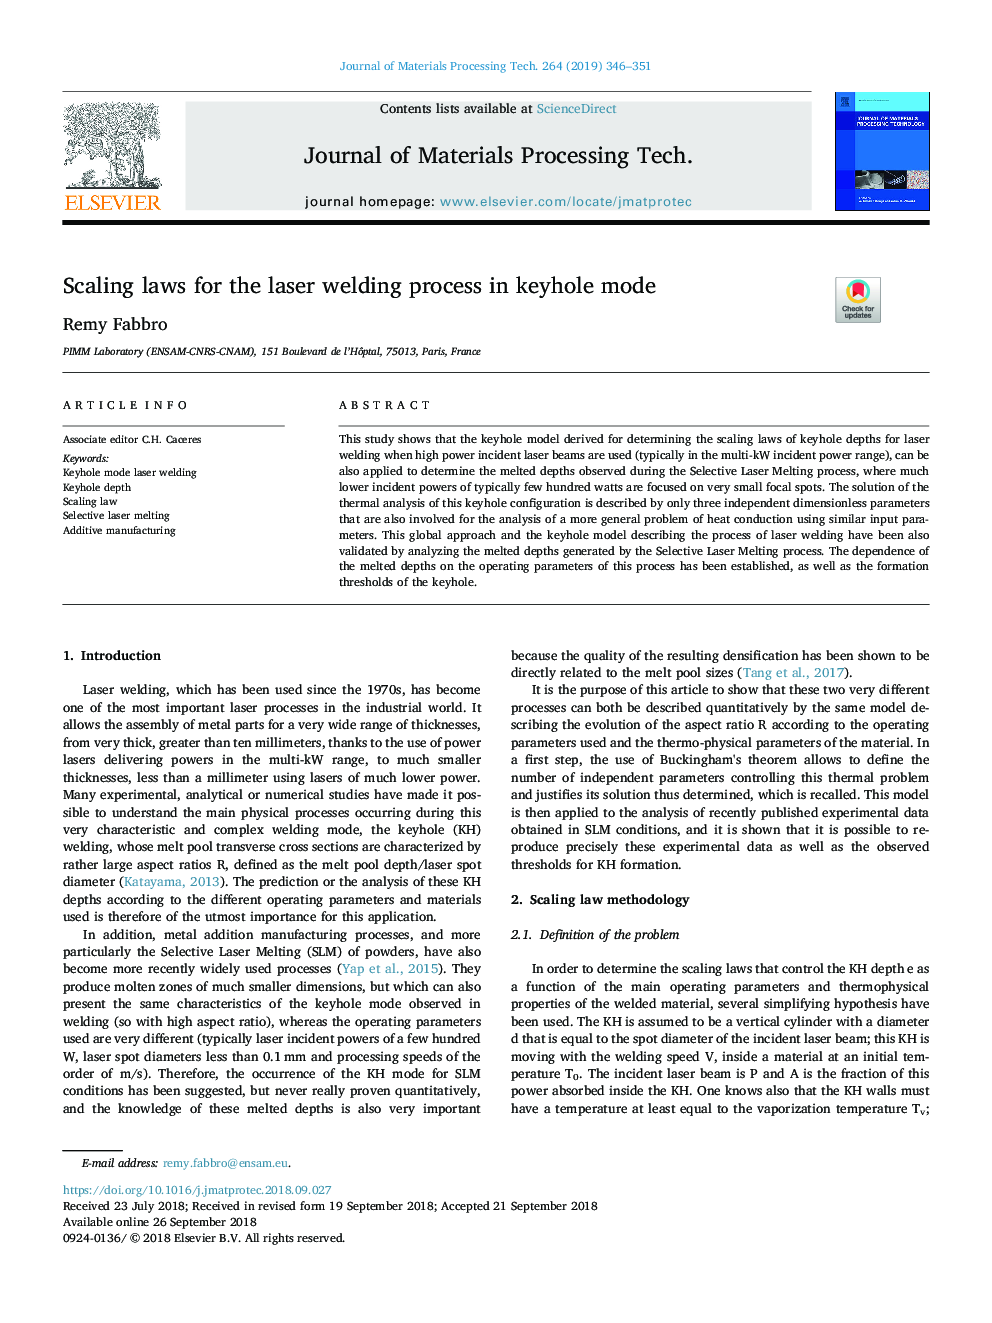 Scaling laws for the laser welding process in keyhole mode